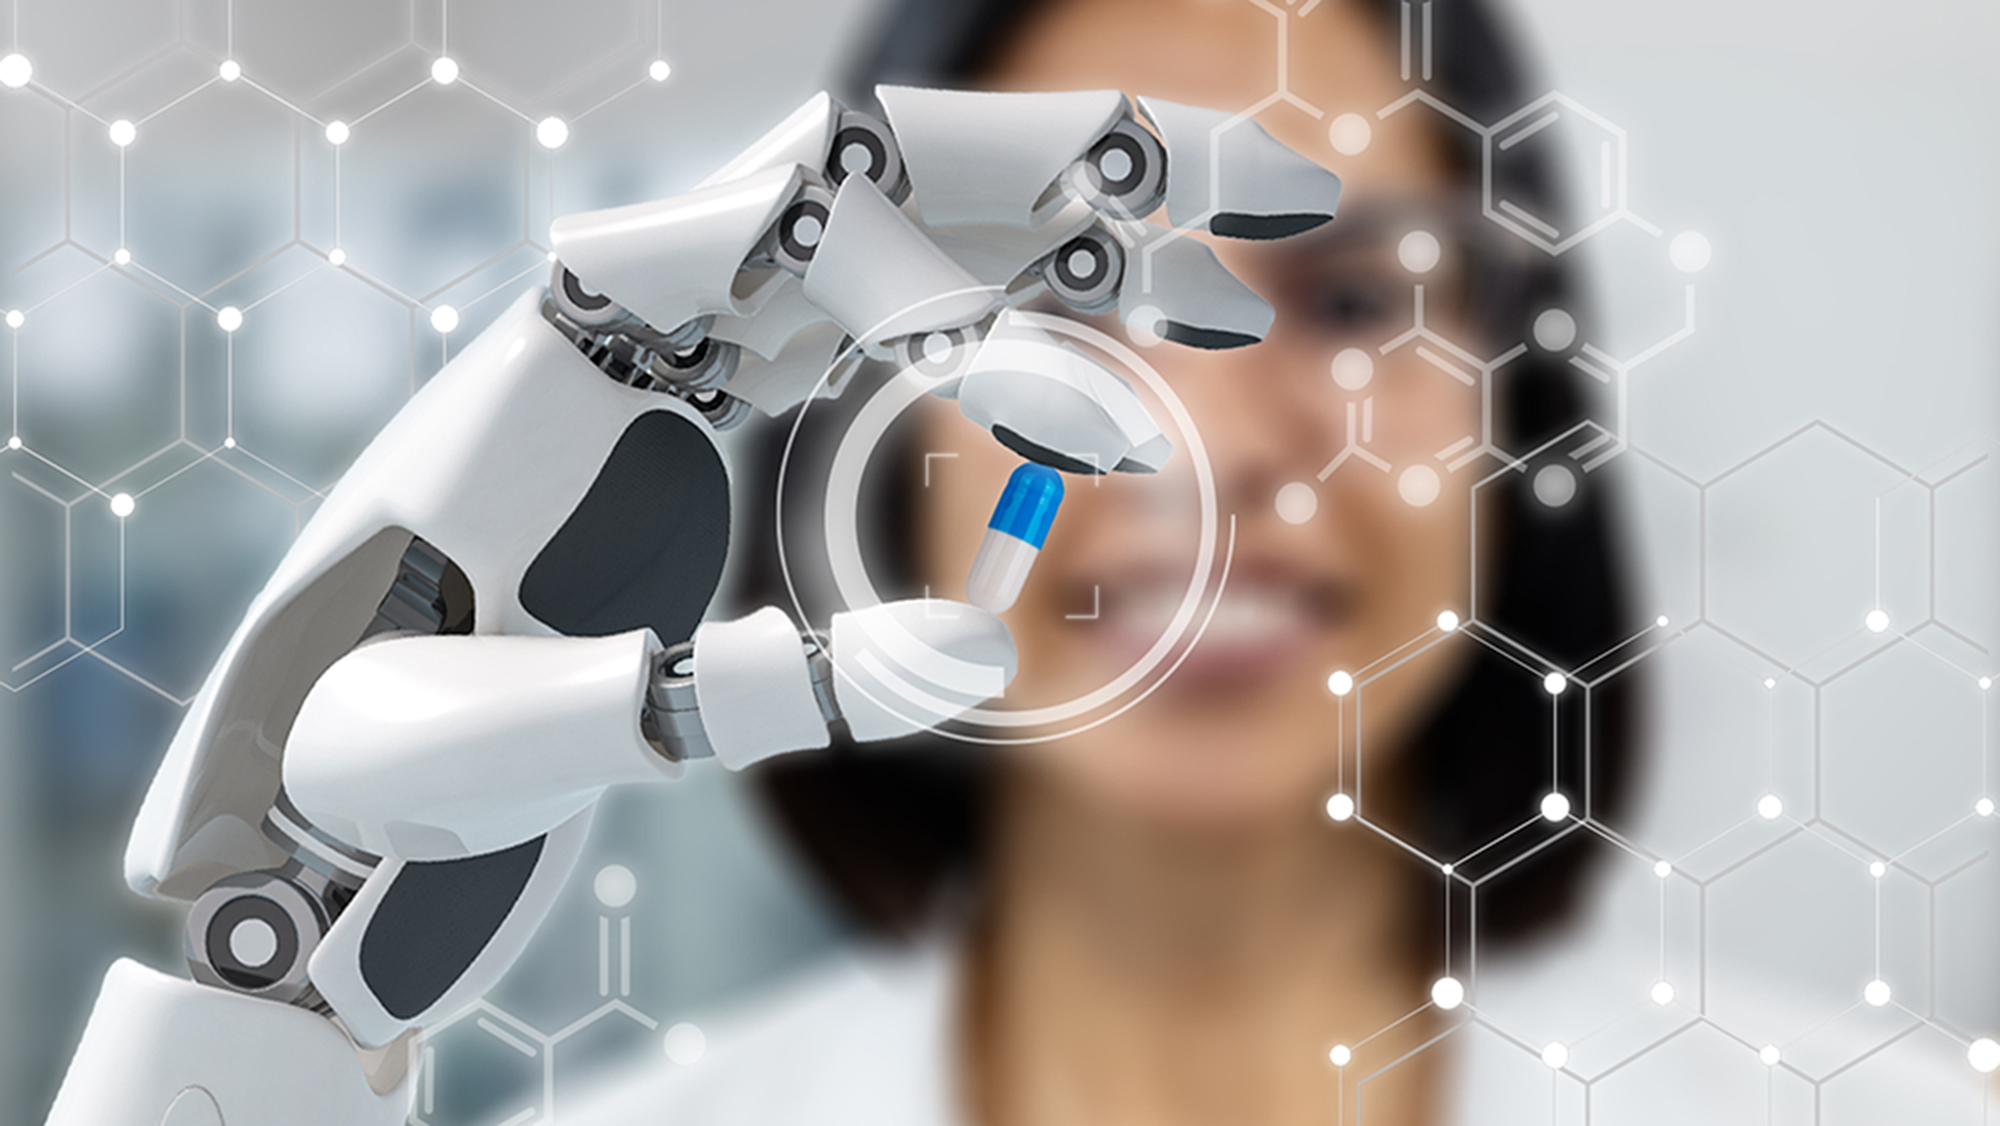 A digitally rendered image of a robotic hand holding a pill in front of a woman's face.